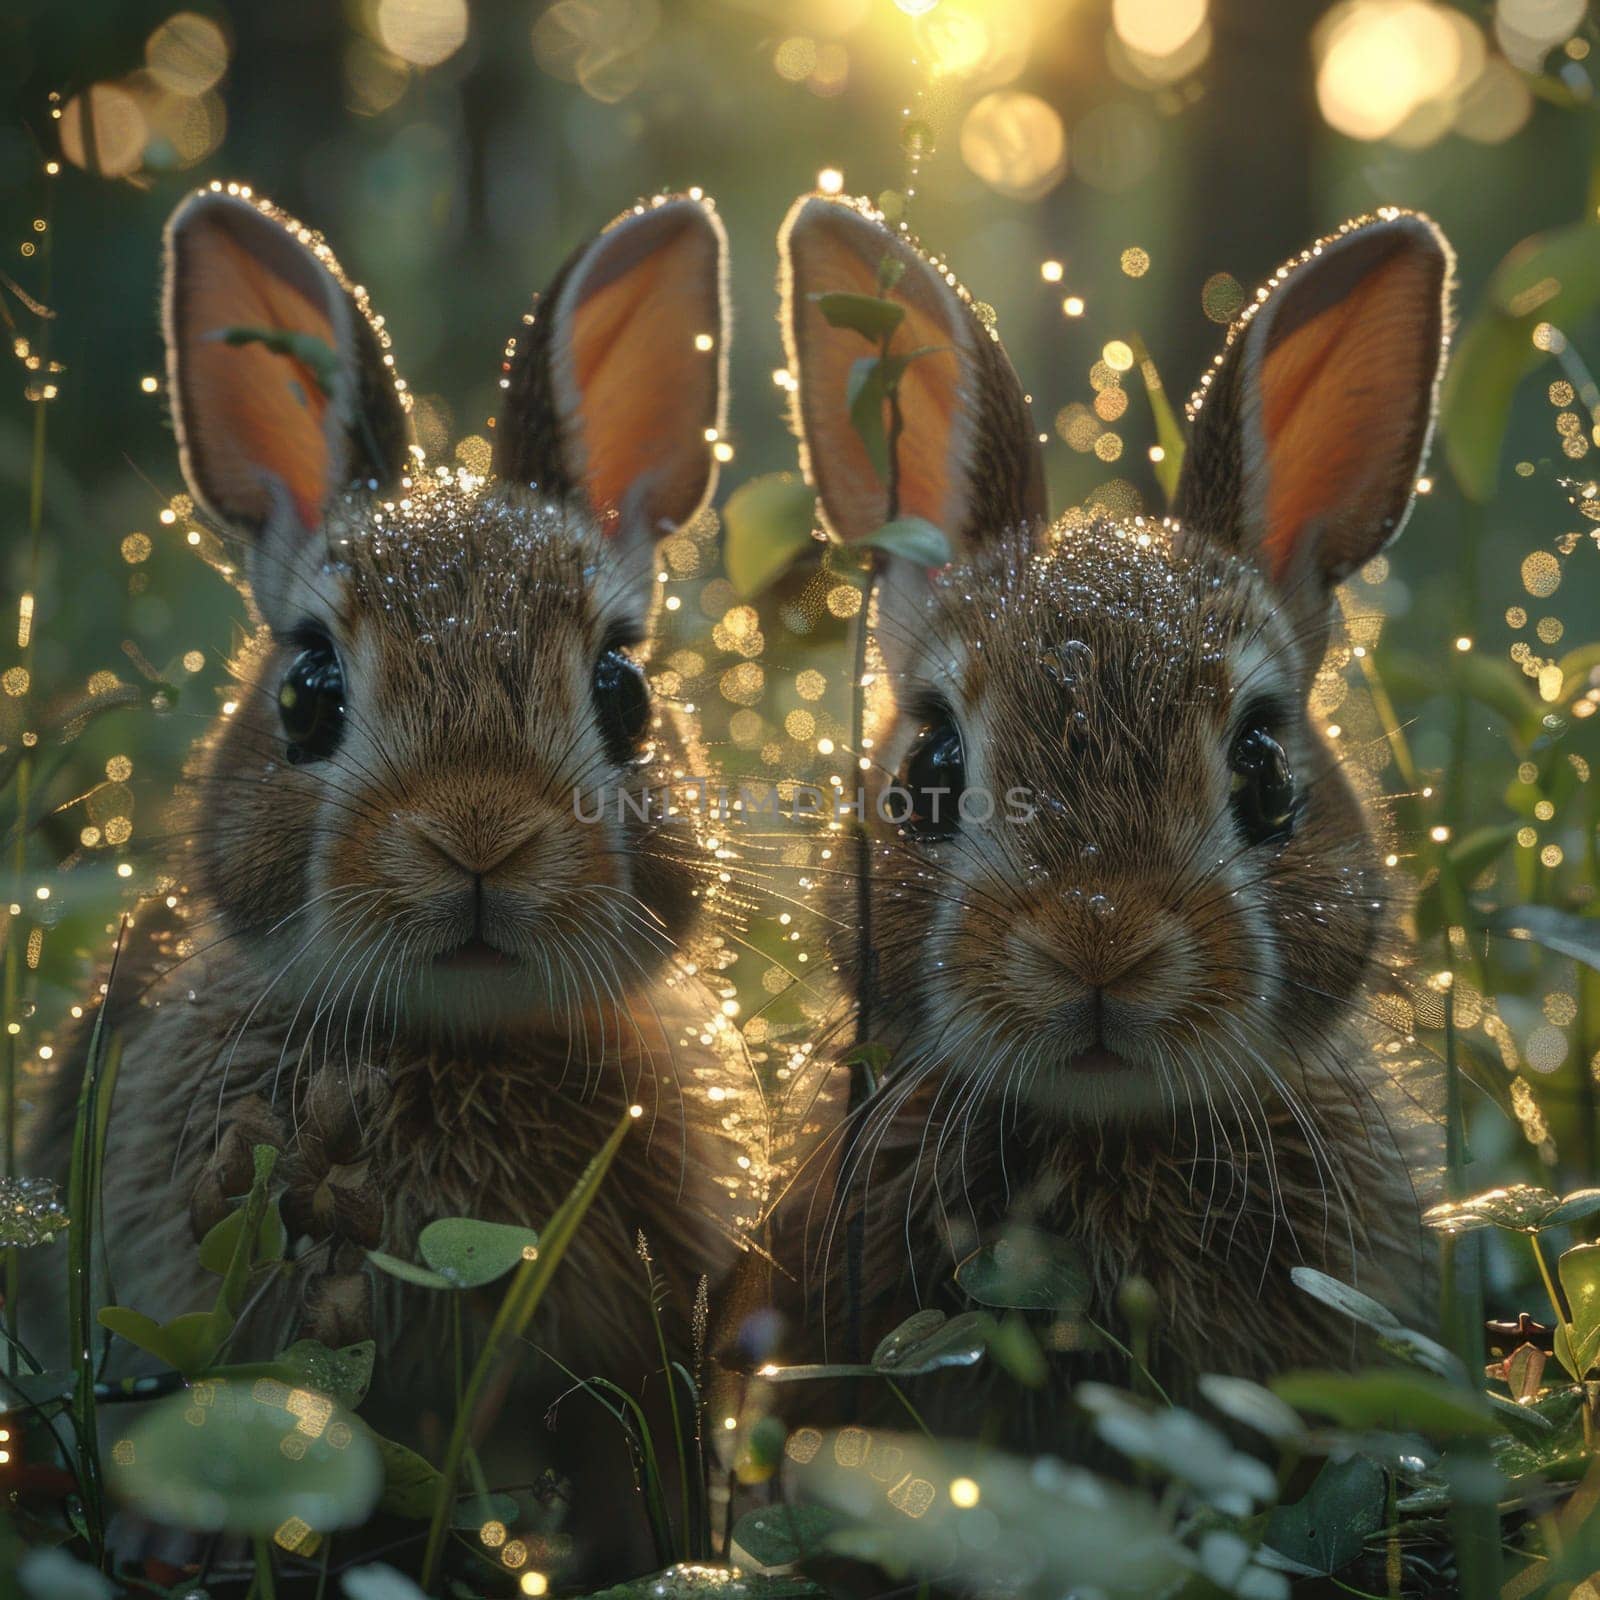 Two rabbits sitting calmly in a grassy field.